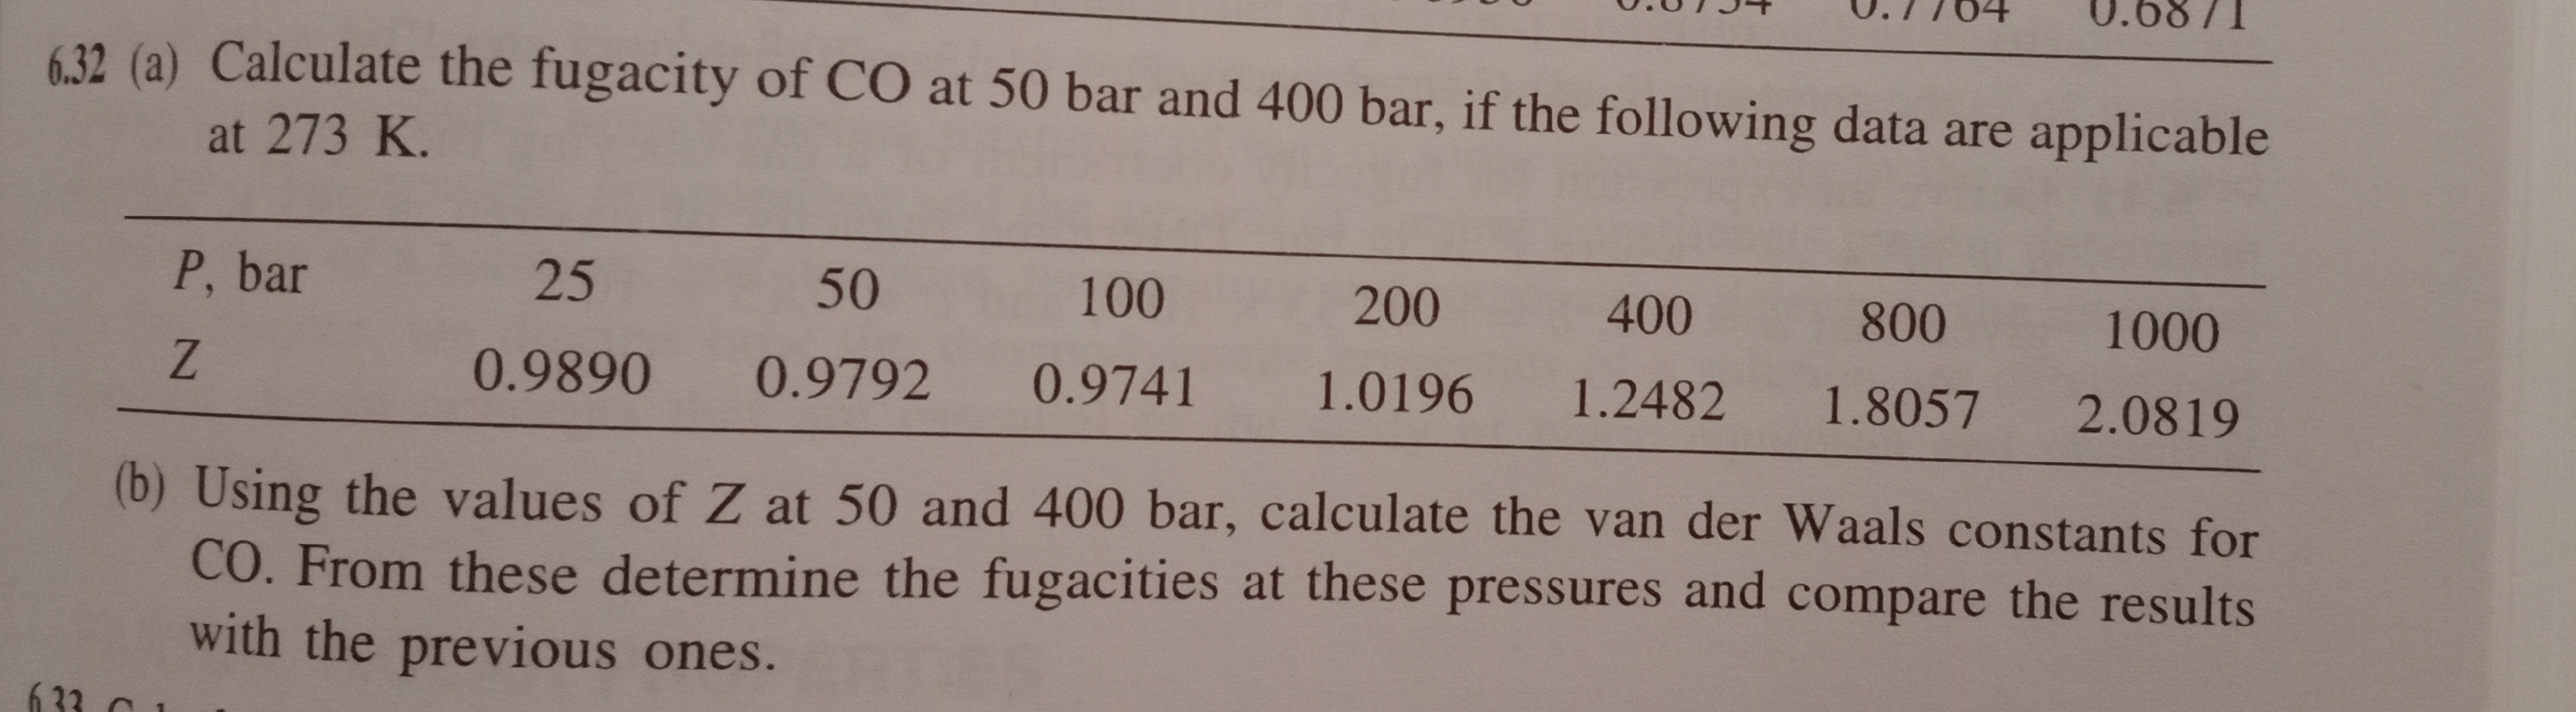 6.32 (a) Calculate the fugacity of CO at 50 bar and 400 bar, if the following data are applicable
at 273 K.
P, bar
25
50
100
200
400
800
1000
0.9890
0.9792
0.9741
1.0196
1.2482
1.8057 2.0819
(b) Using the values of Z at 50 and 400 bar, calculate the van der Waals constants for
CO. From these determine the fugacities at these pressures and compare the results
with the previous ones.
